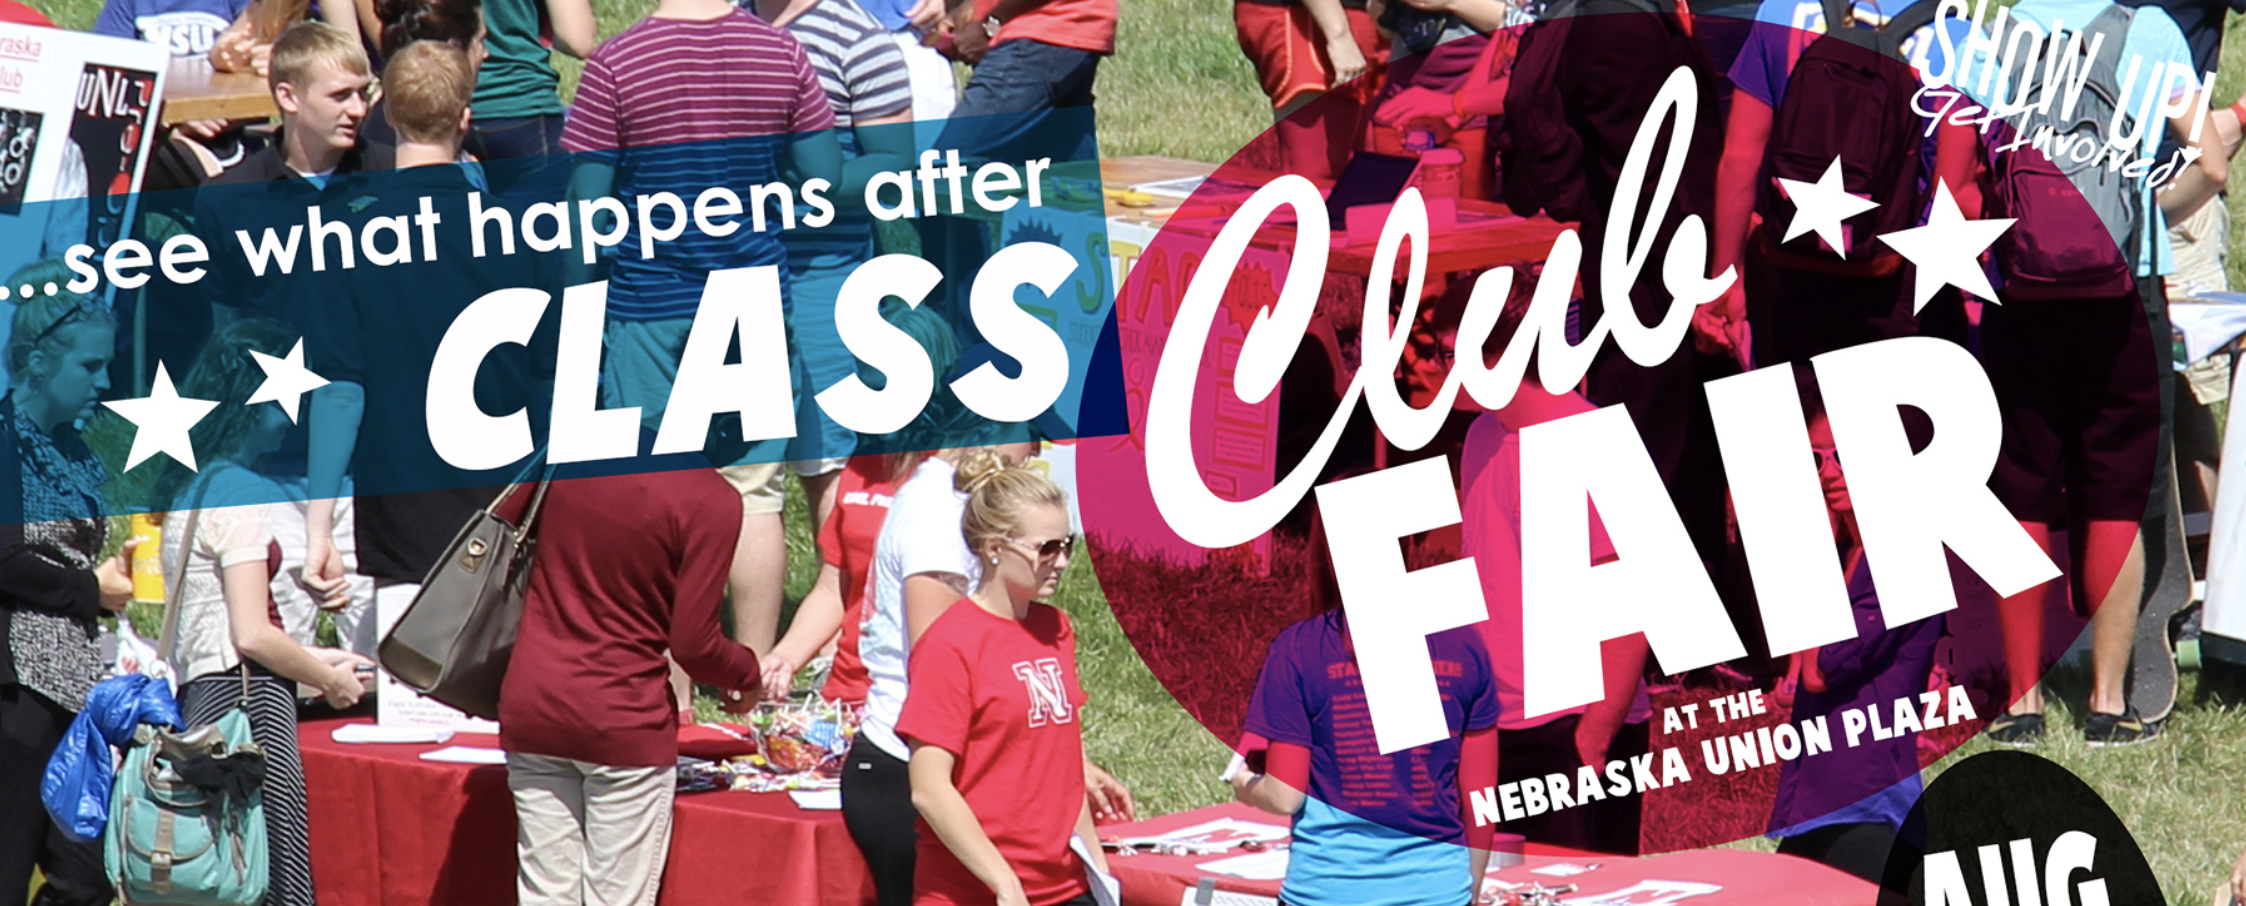 Club Fair on Aug. 28 & 29 is a great time to build connections with fellow Huskers as you explore new interests.